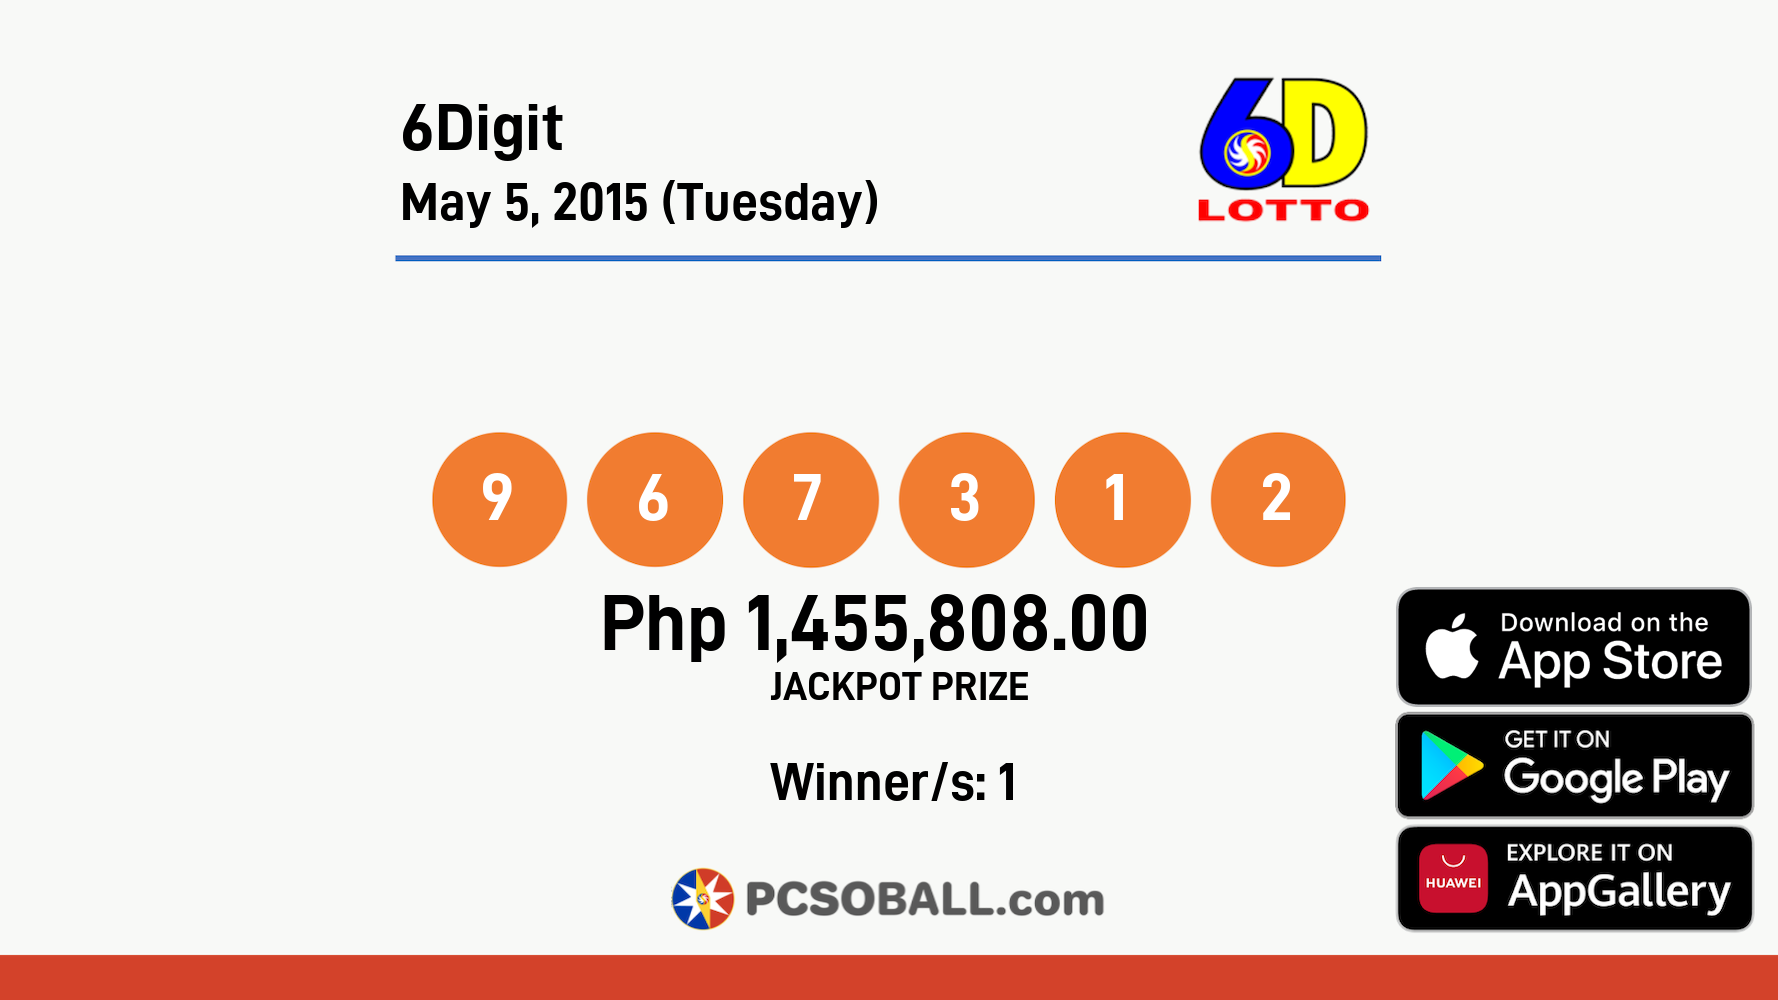 6Digit May 5, 2015 (Tuesday) Result